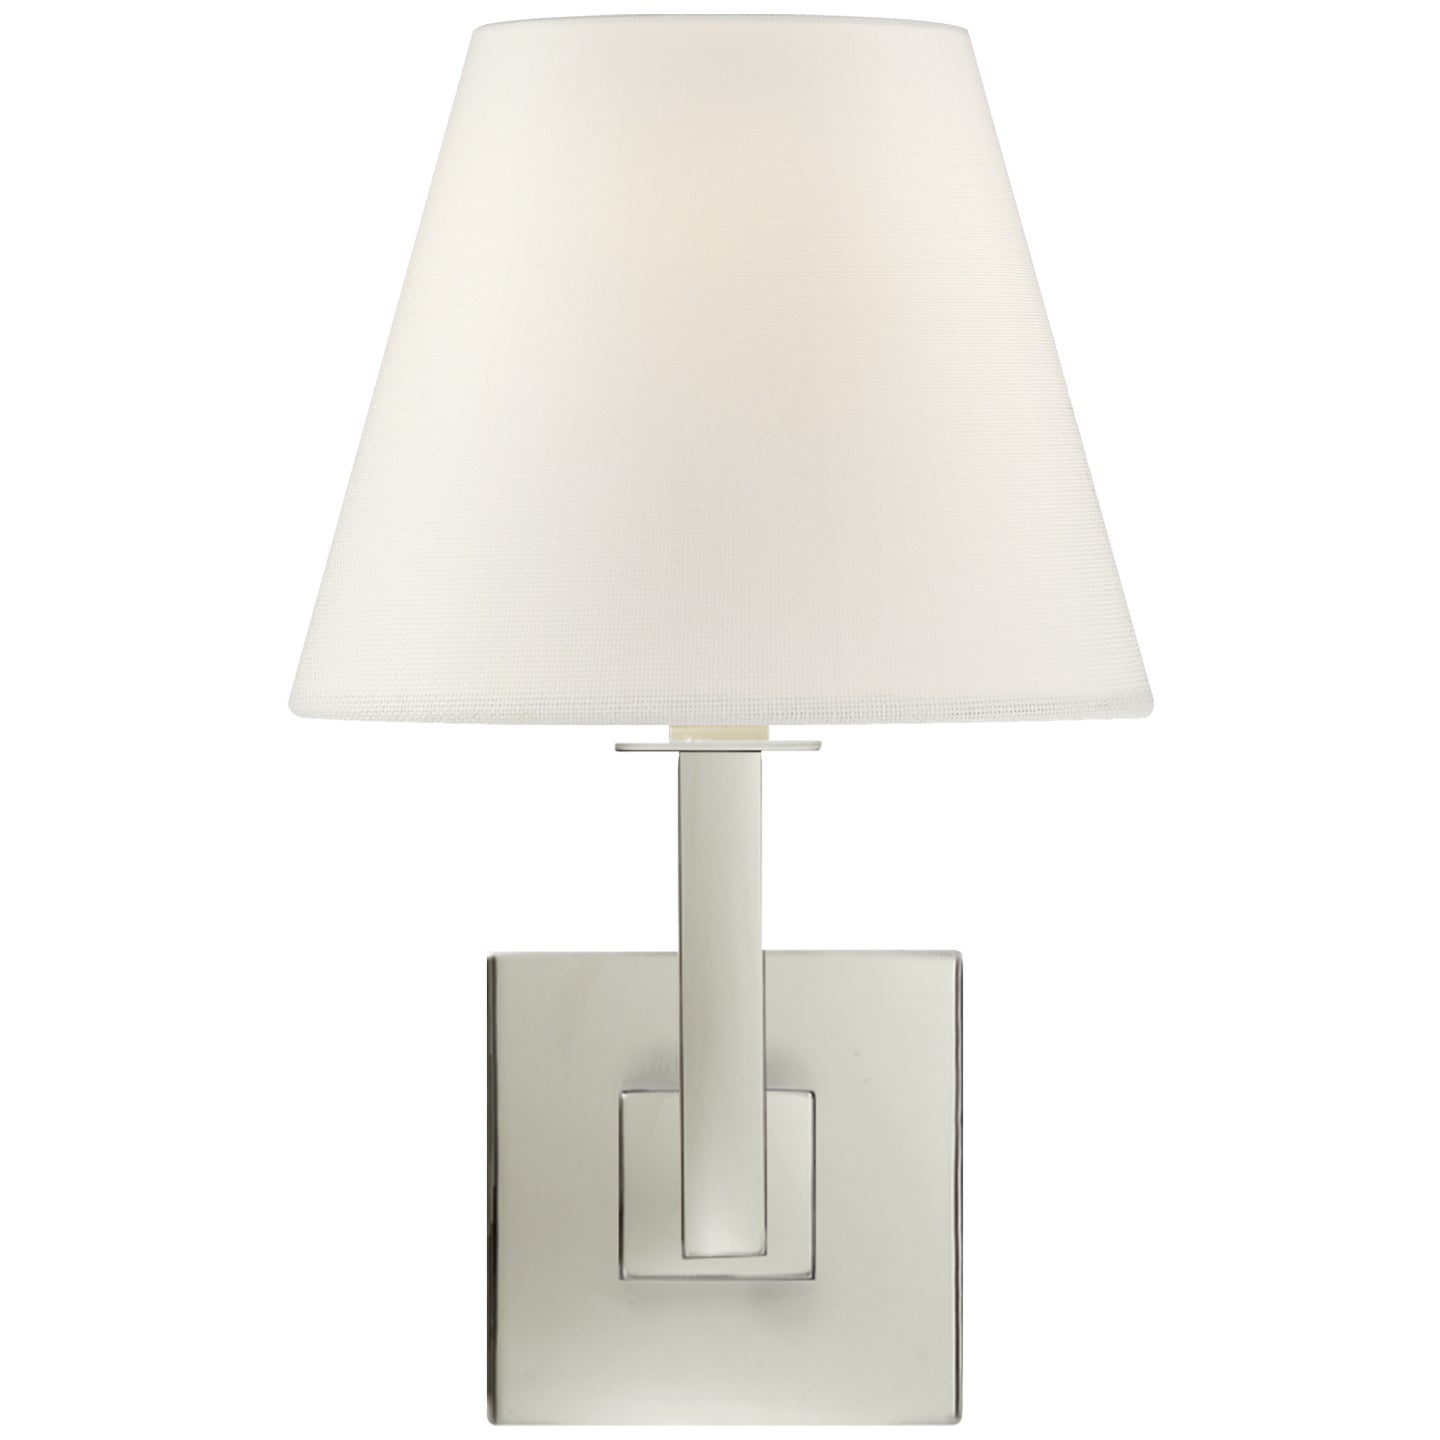 Load image into Gallery viewer, Visual Comfort Signature - S 20PN-L - One Light Wall Sconce - Architectural - Polished Nickel
